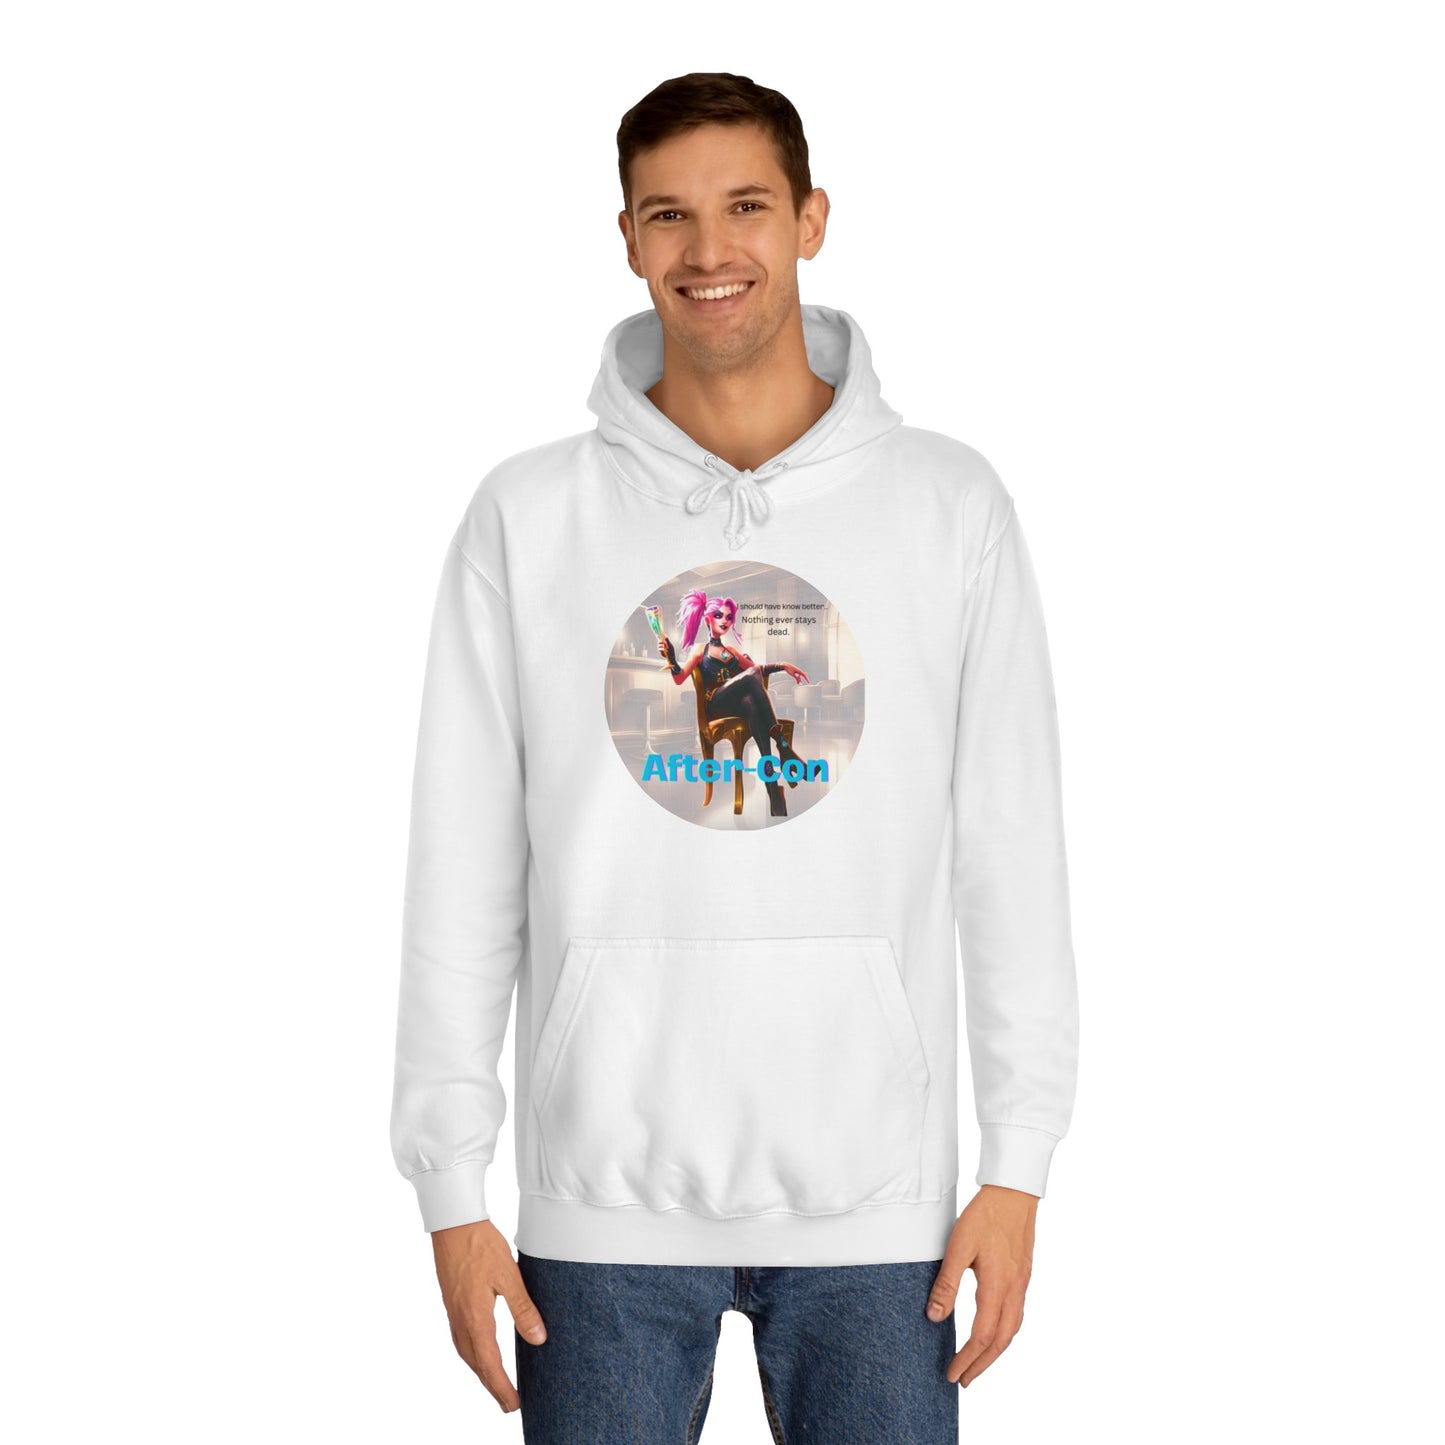 After-Con "Nothing ever stays" Unisex College Hoodie